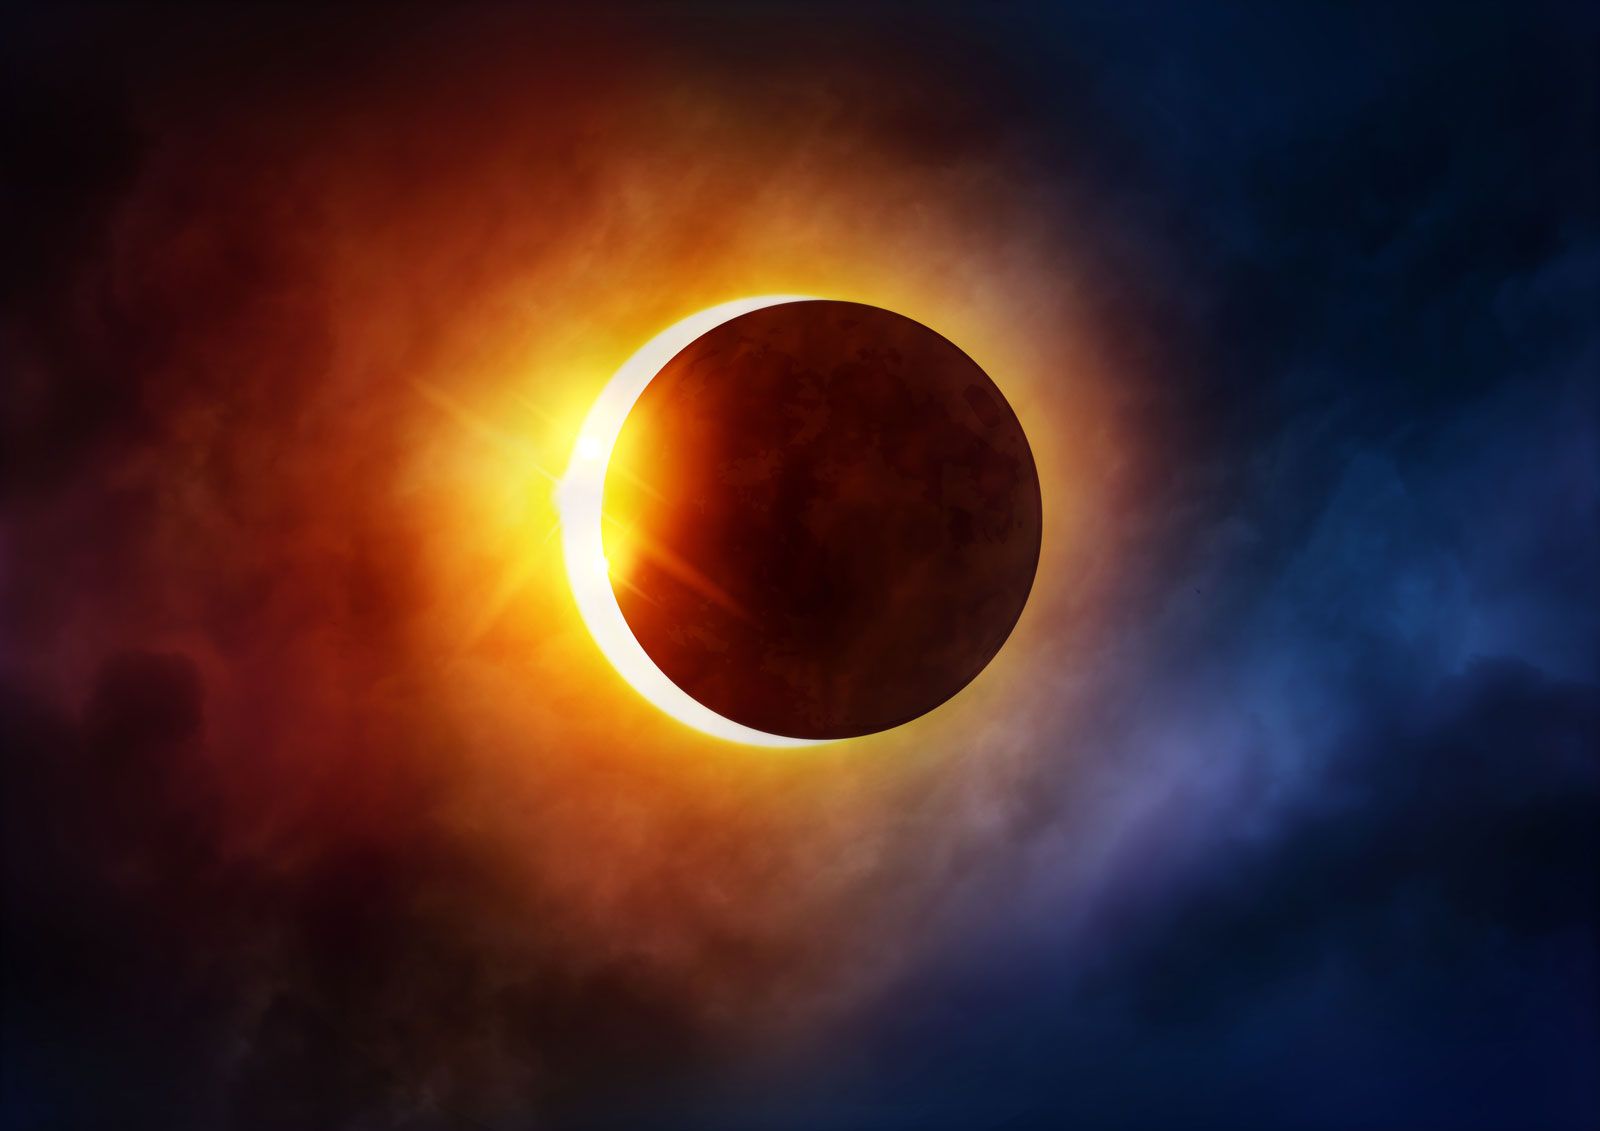 Get Ready for a Mind-Blowing Solar Eclipse Crossing the US in 2024